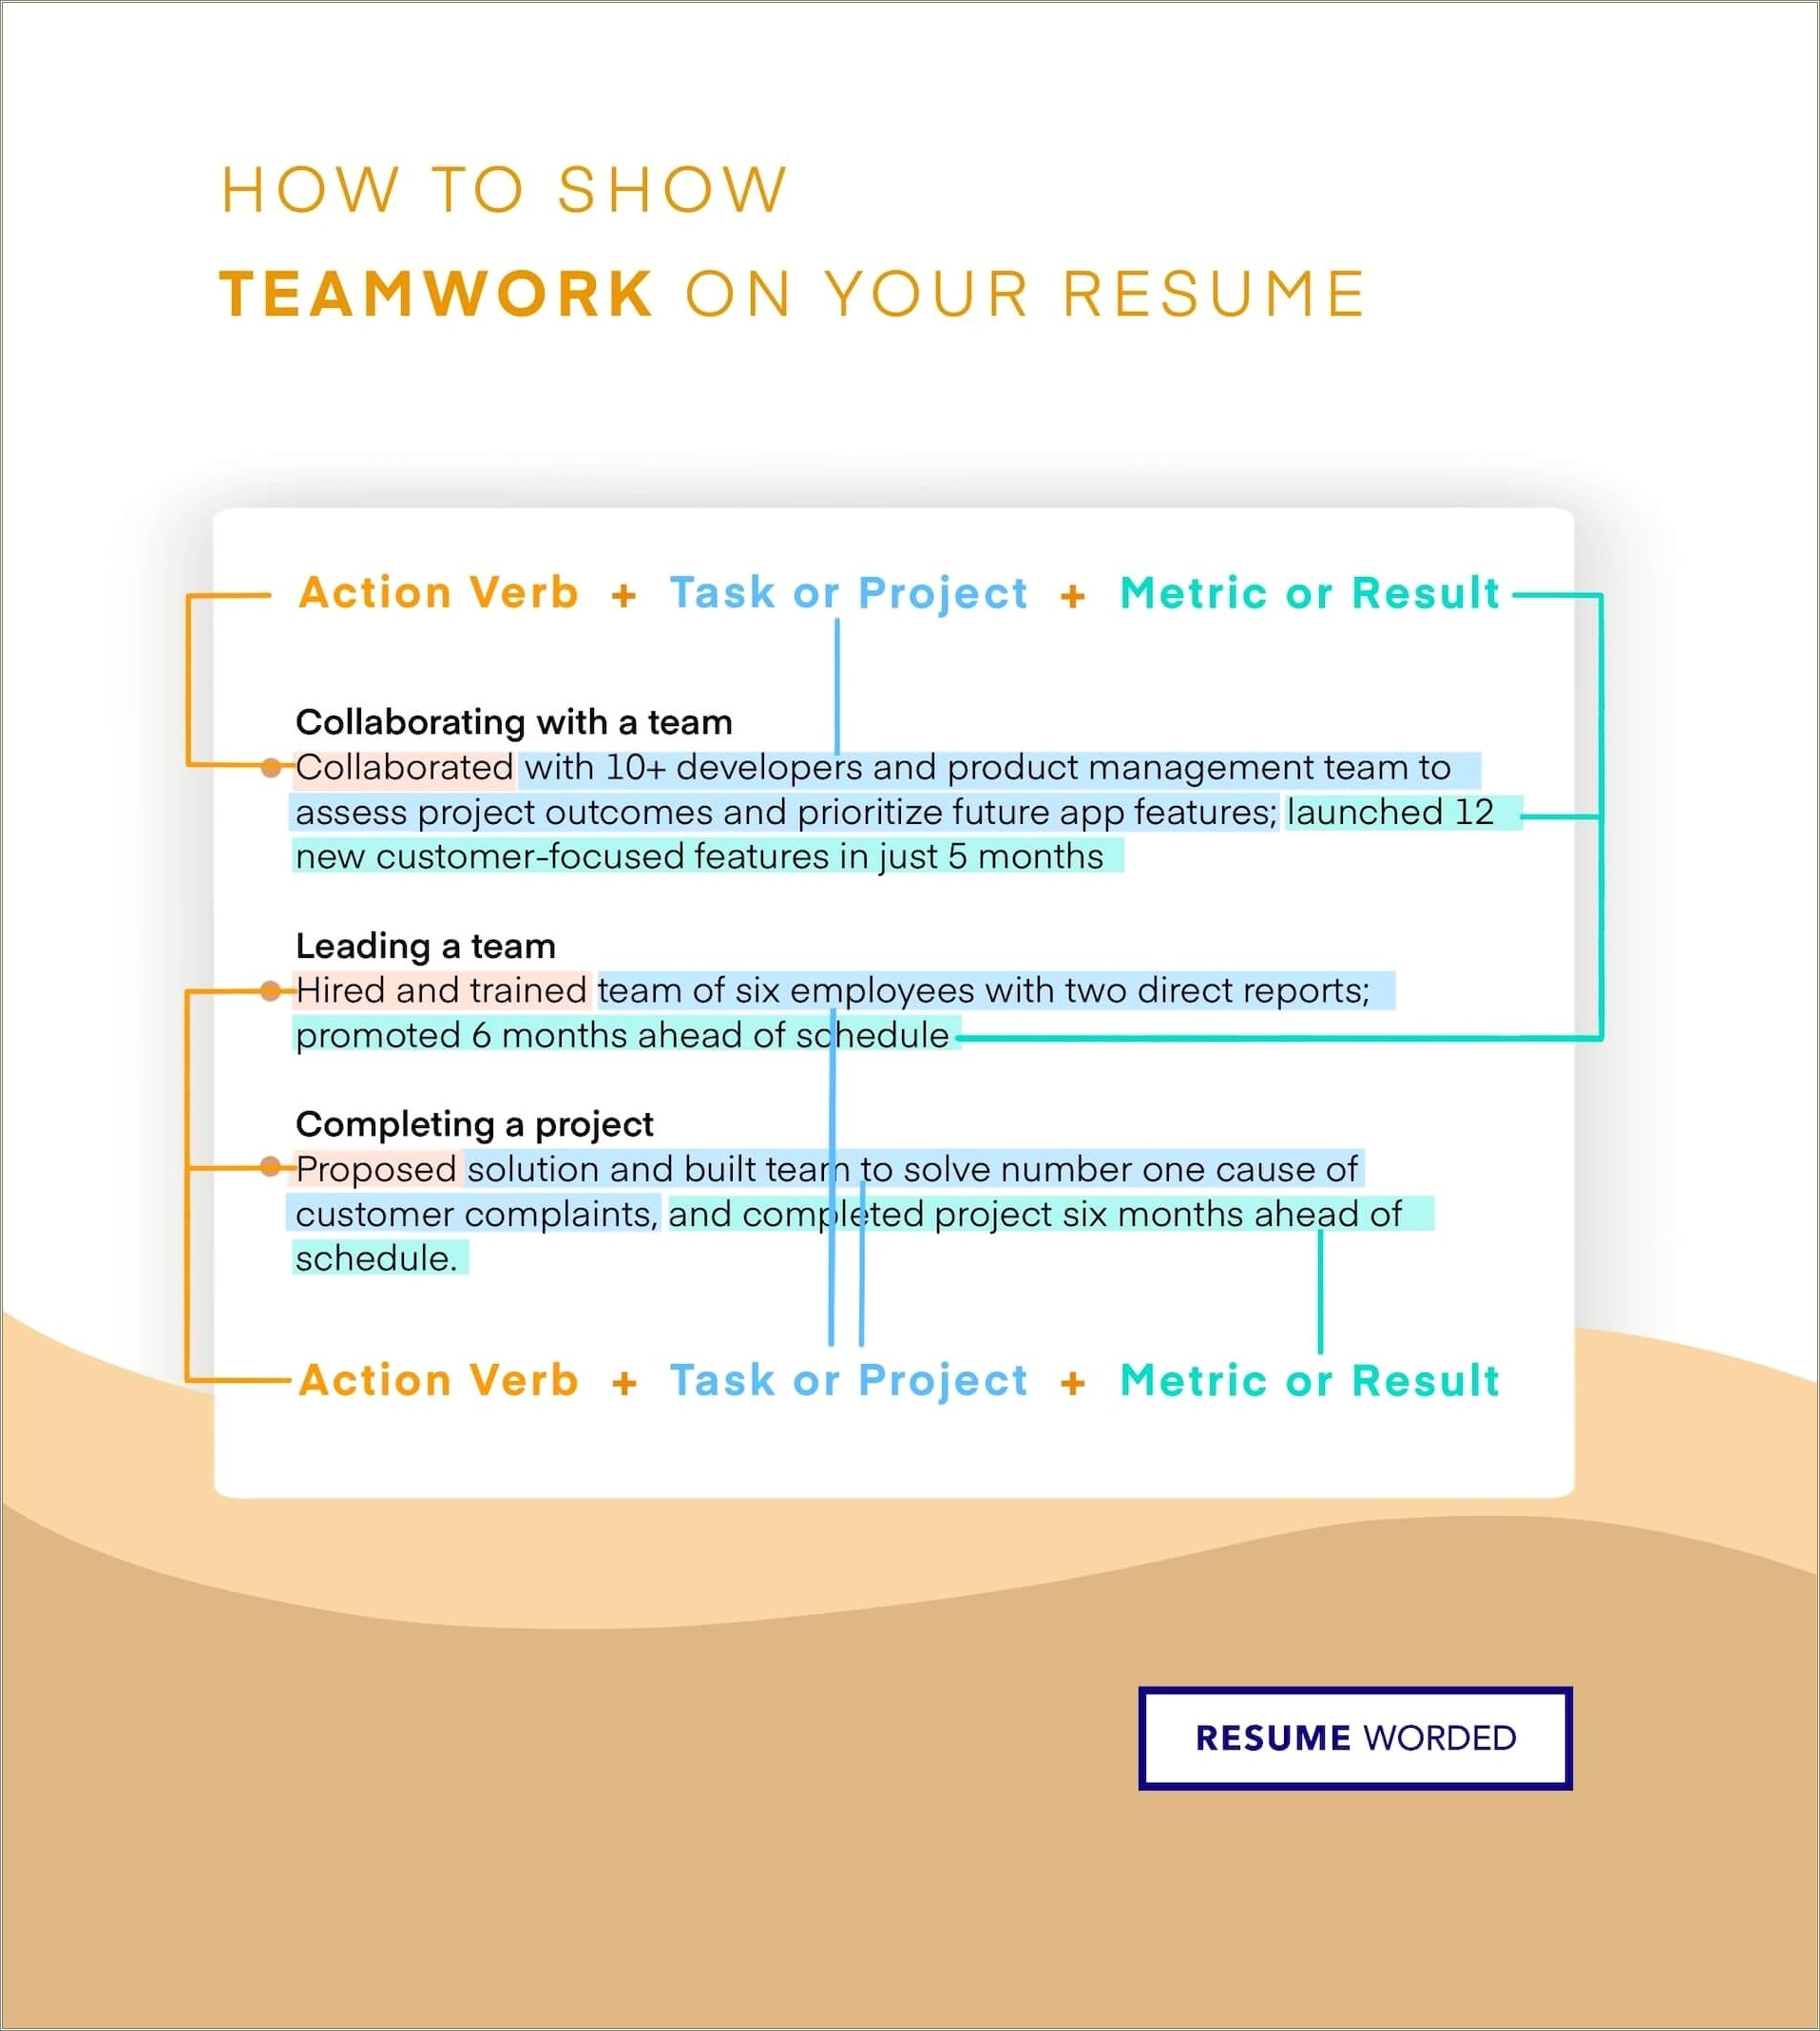 Resume Keywords For Working With Kids